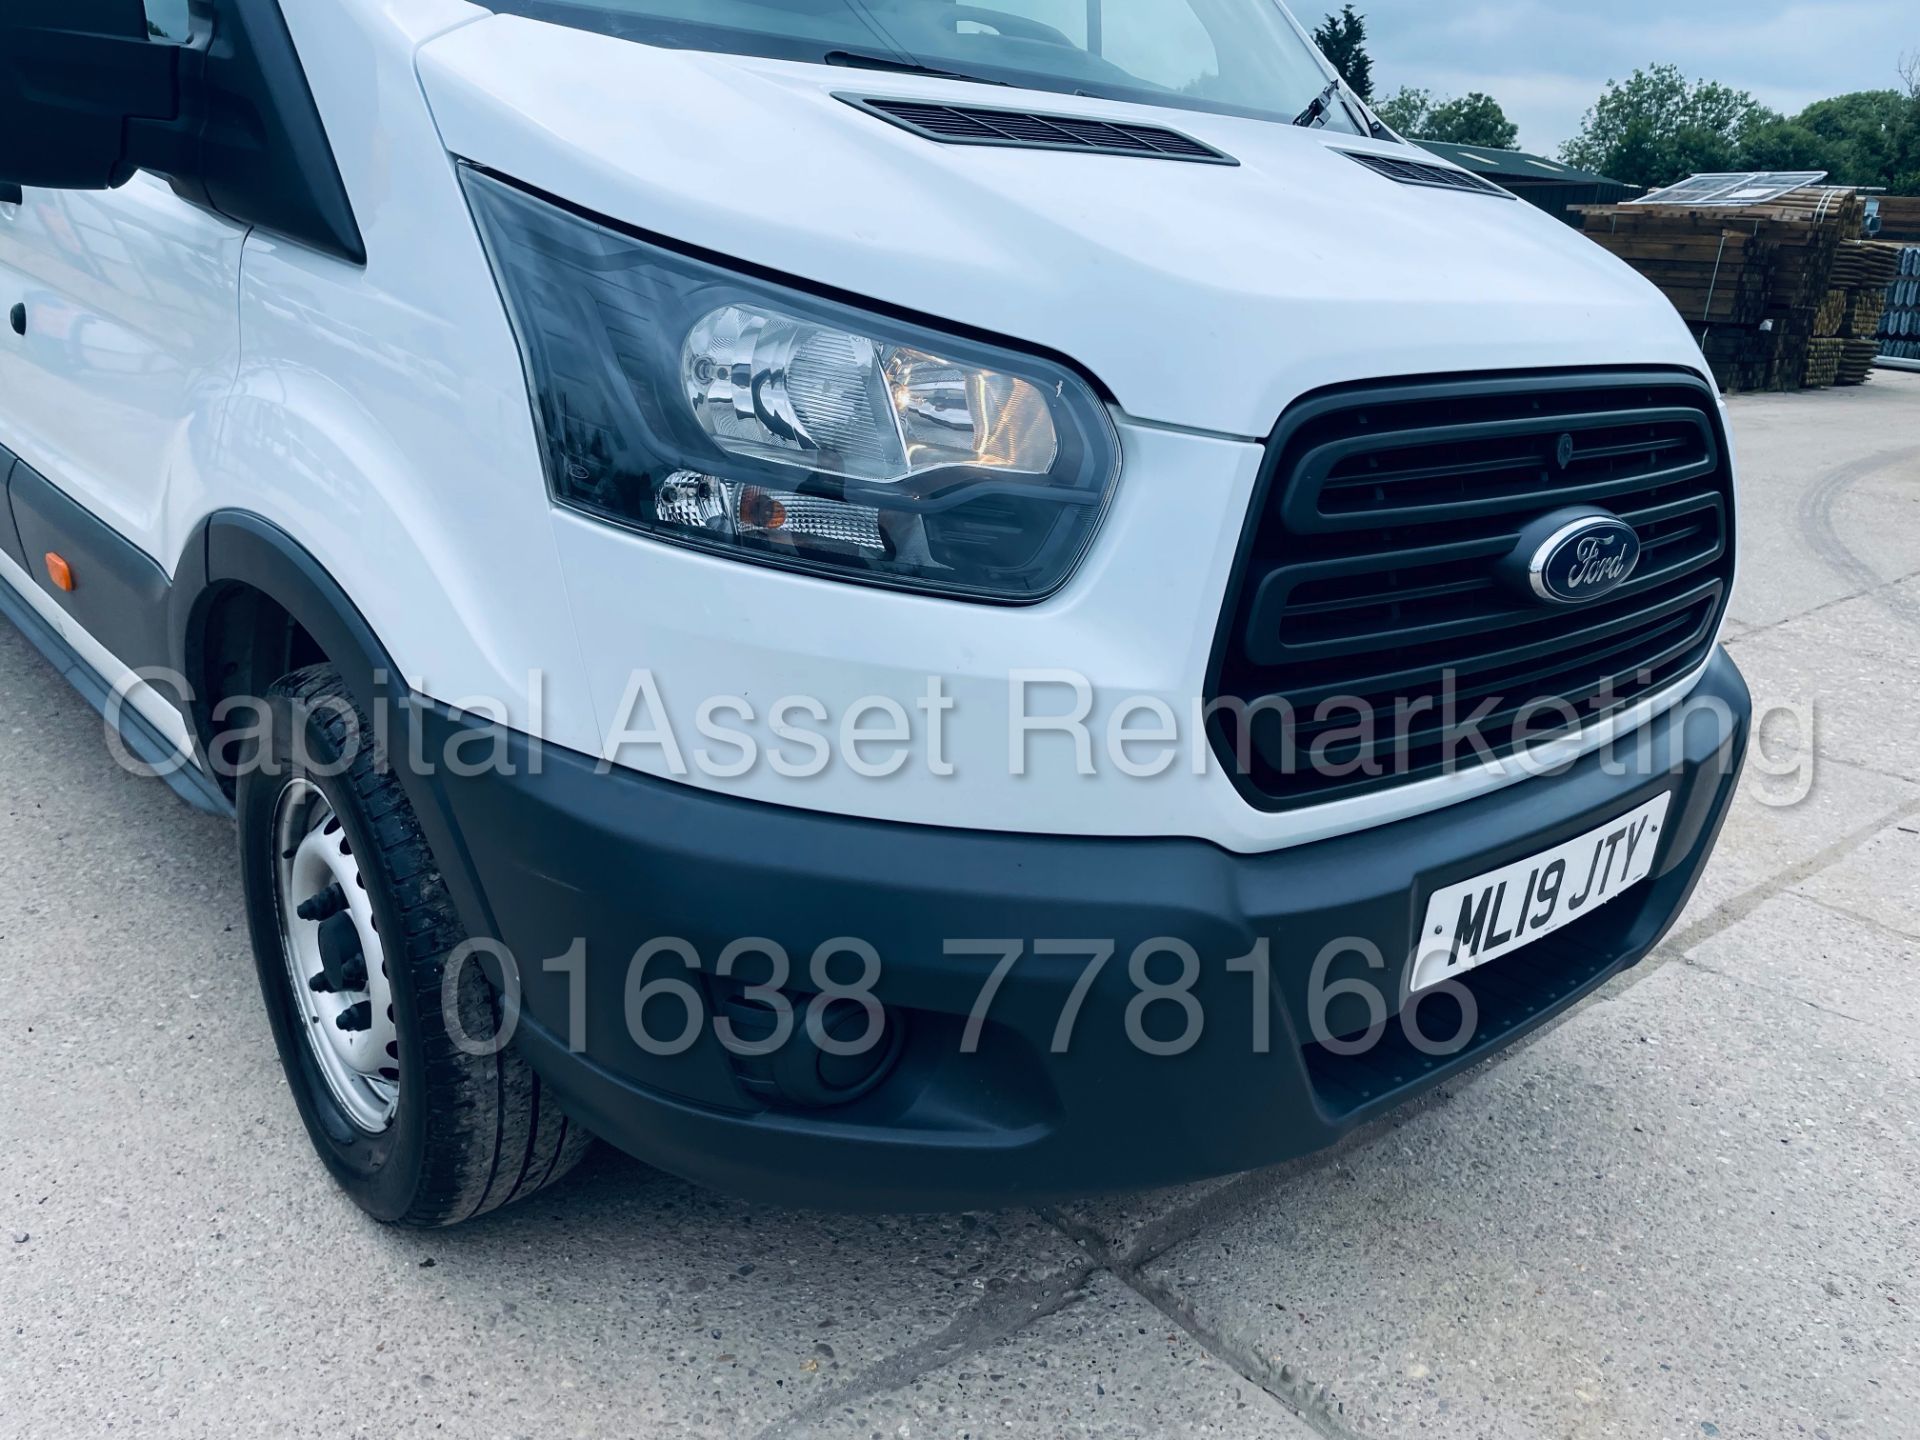 FORD TRANSIT 130 T350 *L4 - XLWB HI-ROOF* (2019 - EURO 6) '2.0 TDCI - 6 SPEED' (1 OWNER) *AIR CON* - Image 15 of 42